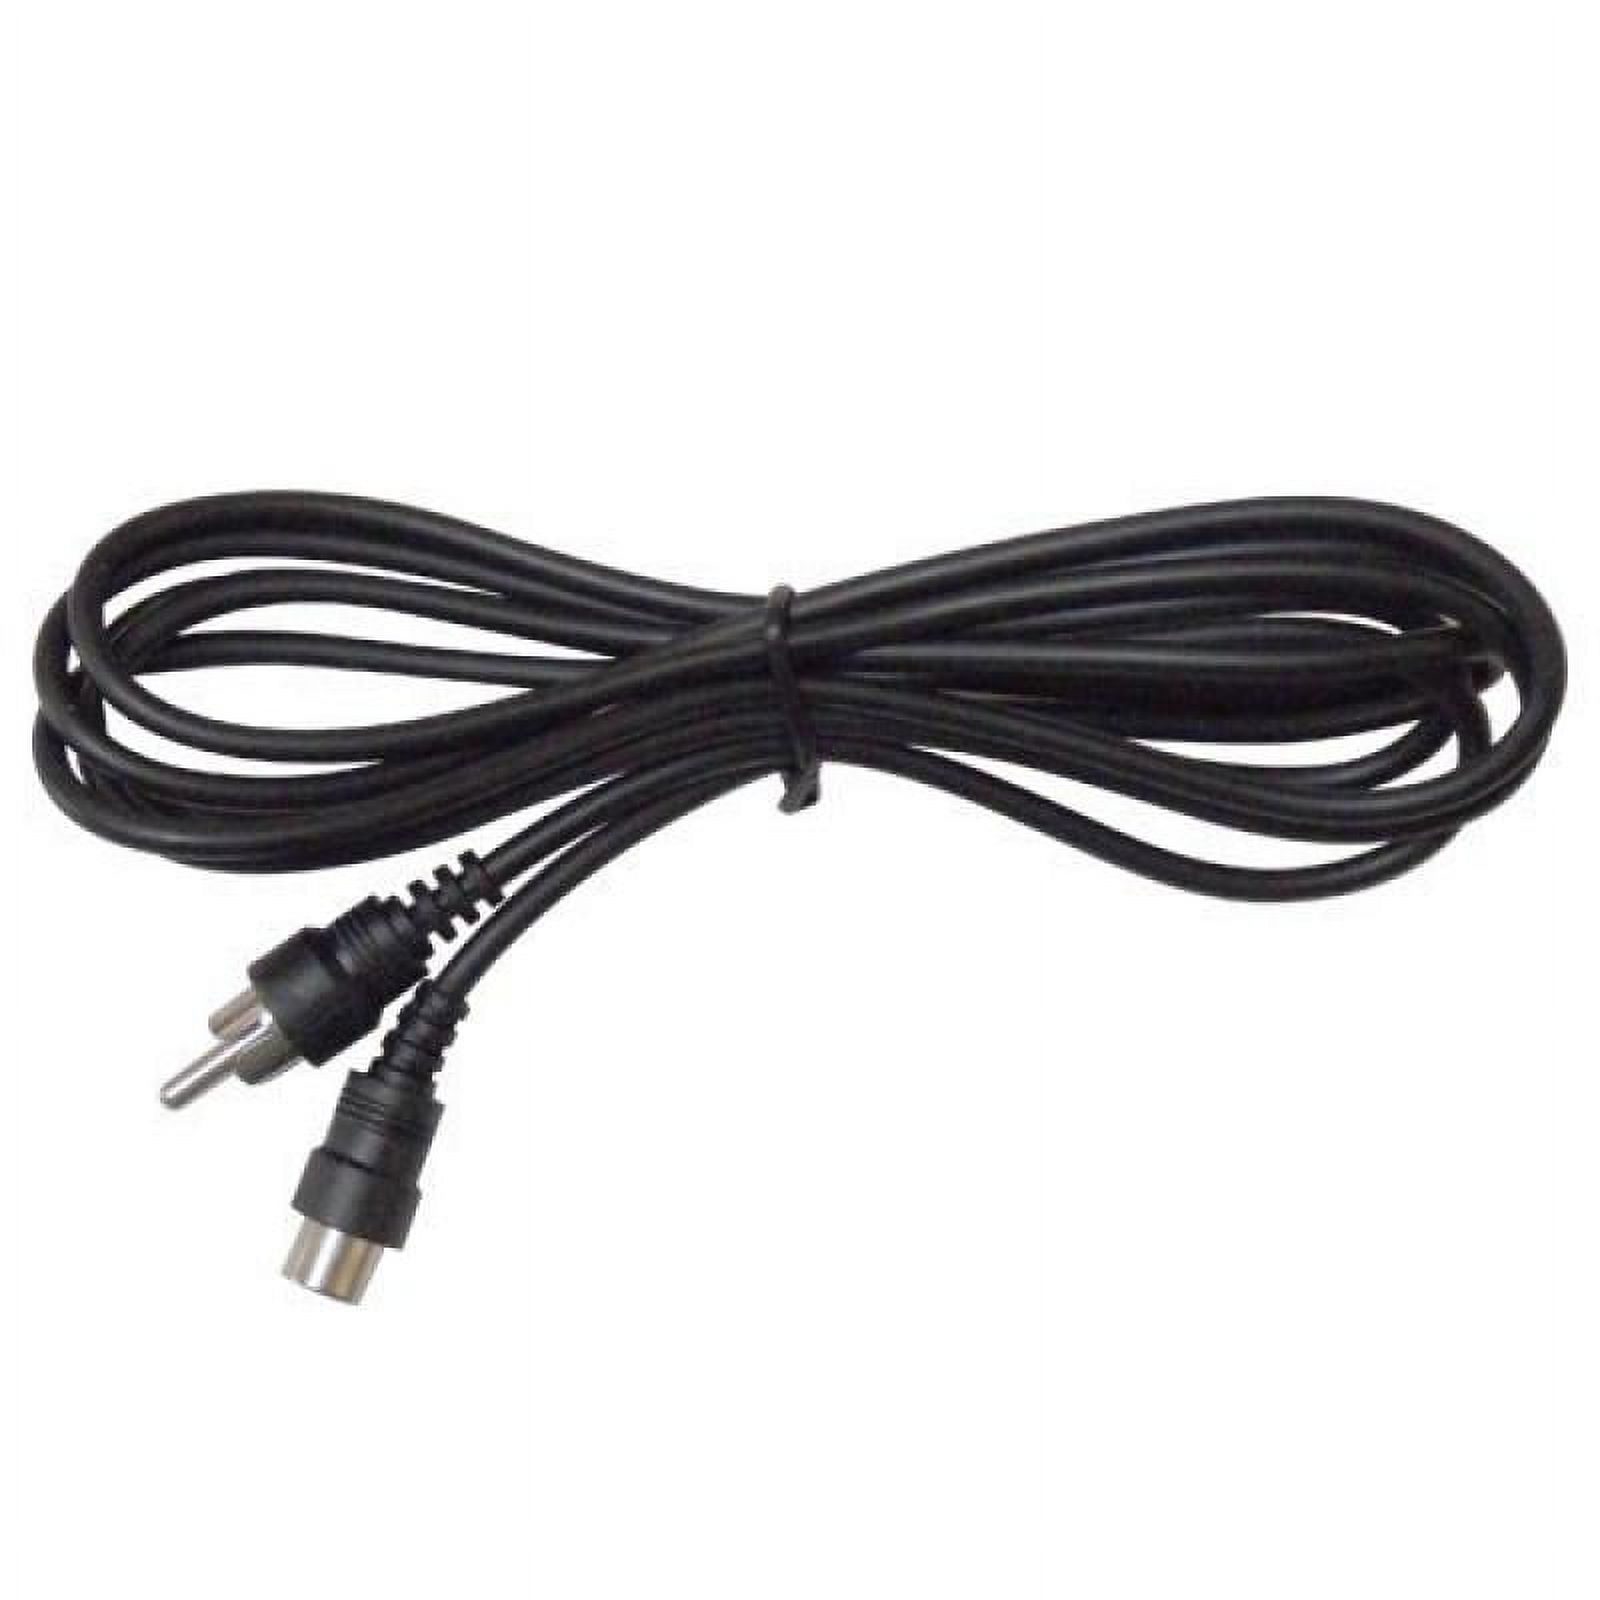 NVX XIX27 X-Series: 7m (22.97 ft) 2-Channel RCA Audio Interconnect Cable - image 2 of 5